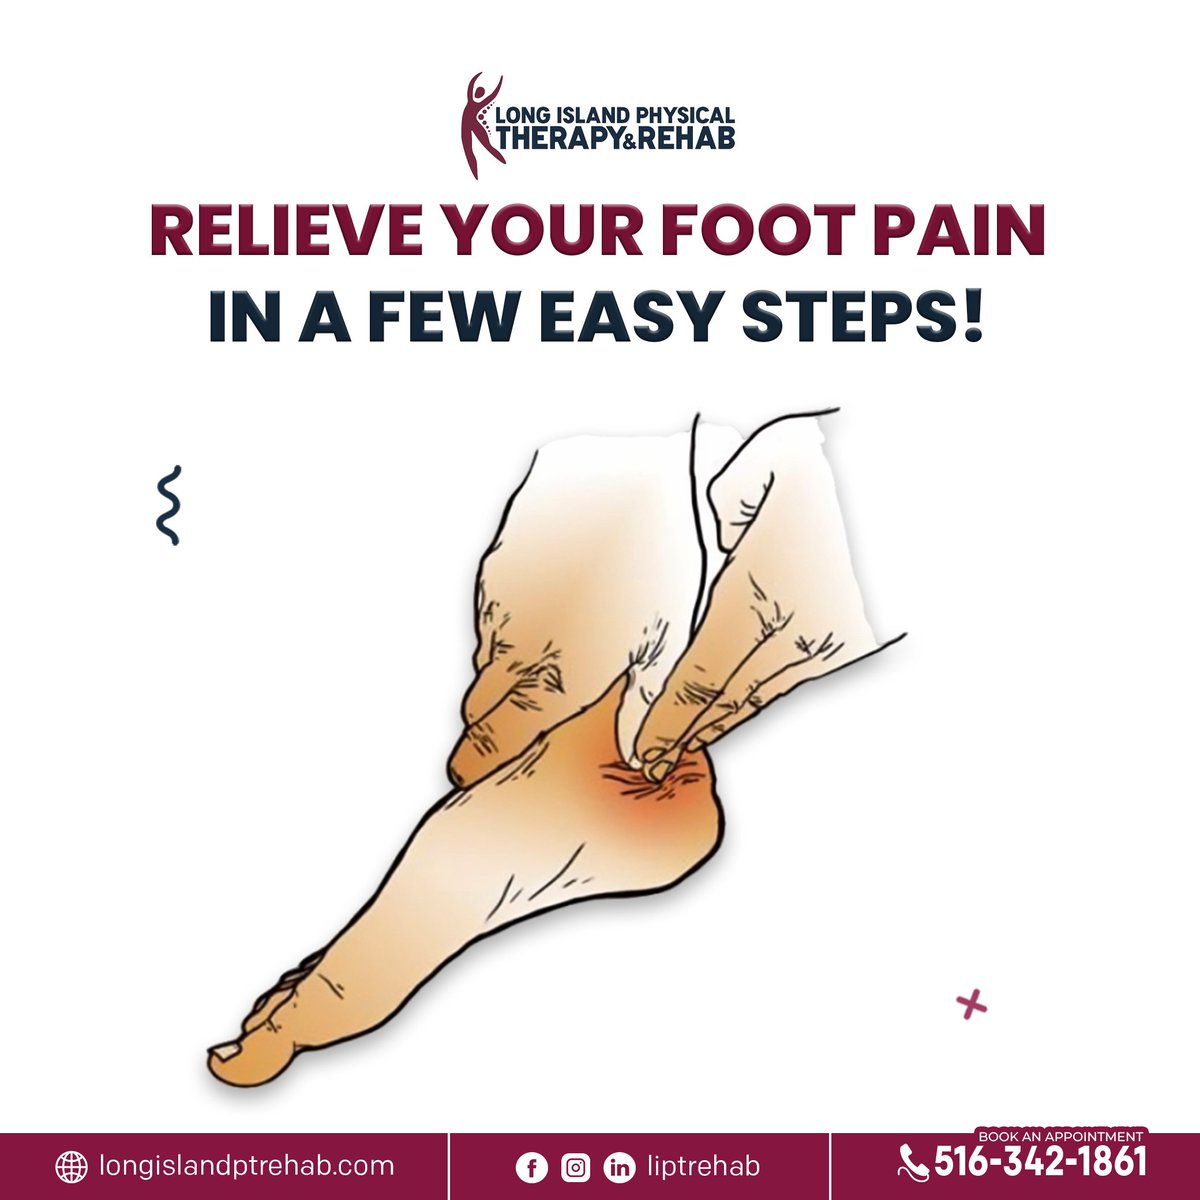 This Simple Technique Will Relieve Your Awful Foot Pain! 👣💡
🟢 Sit down and cross one leg over the other.
🟢 Use your thumb to press firmly and move slowly across the arch of your foot.
🟢 Focus on tender areas but avoid pressing too hard.
#footpain #plantarfasciitis #heelpain